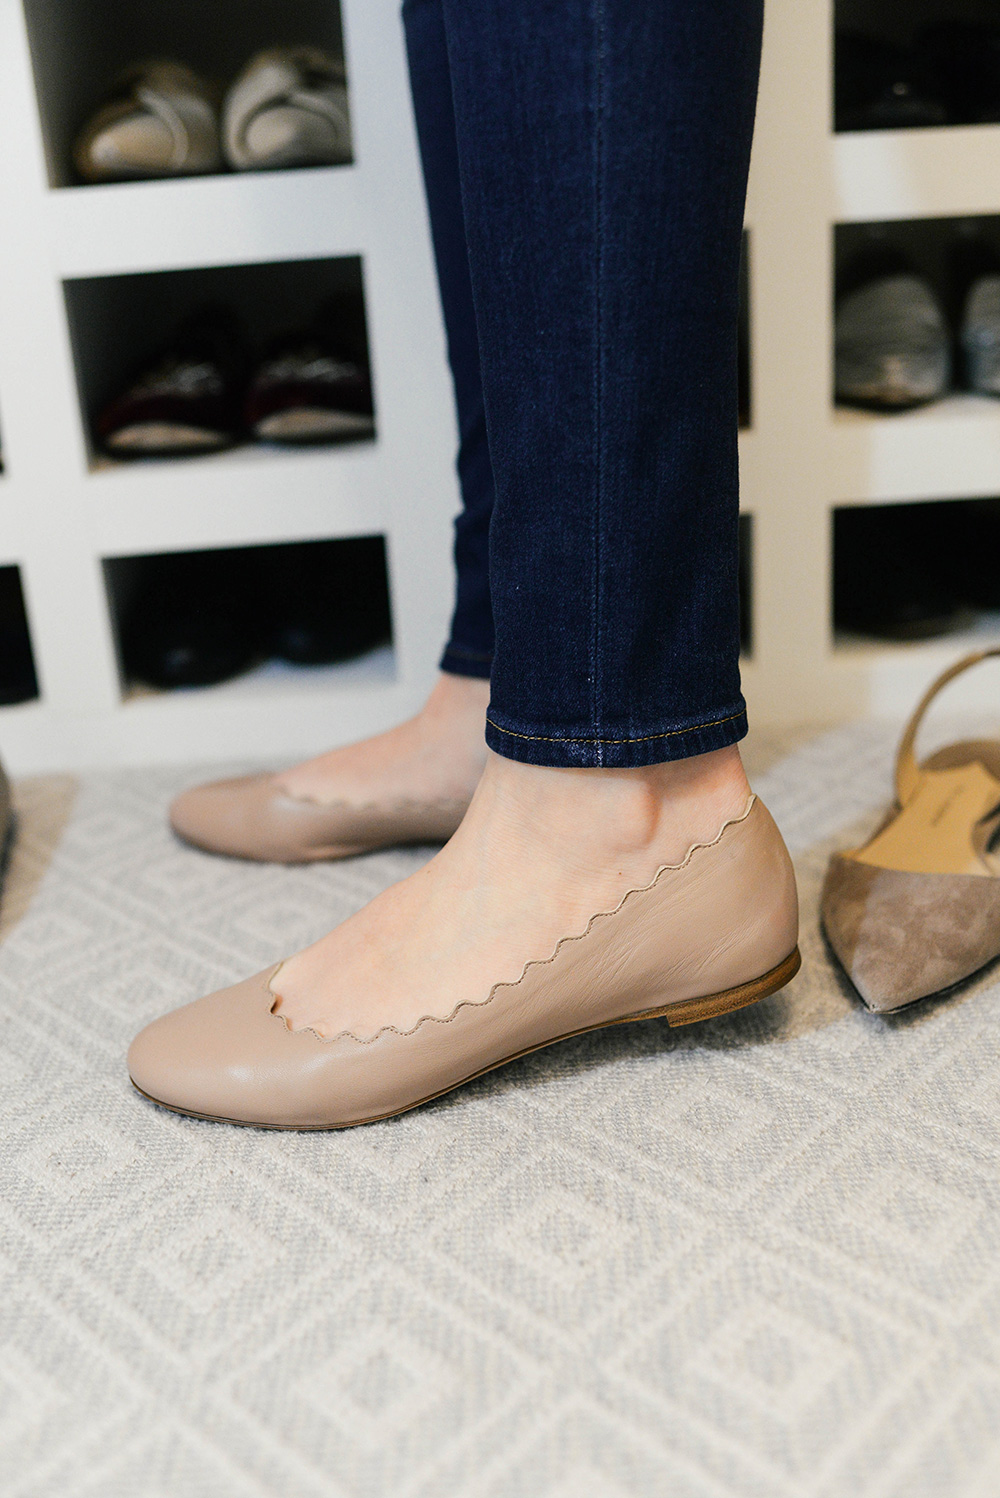 Chloe Leather Scalloped Ballet Flats | Style Scribe